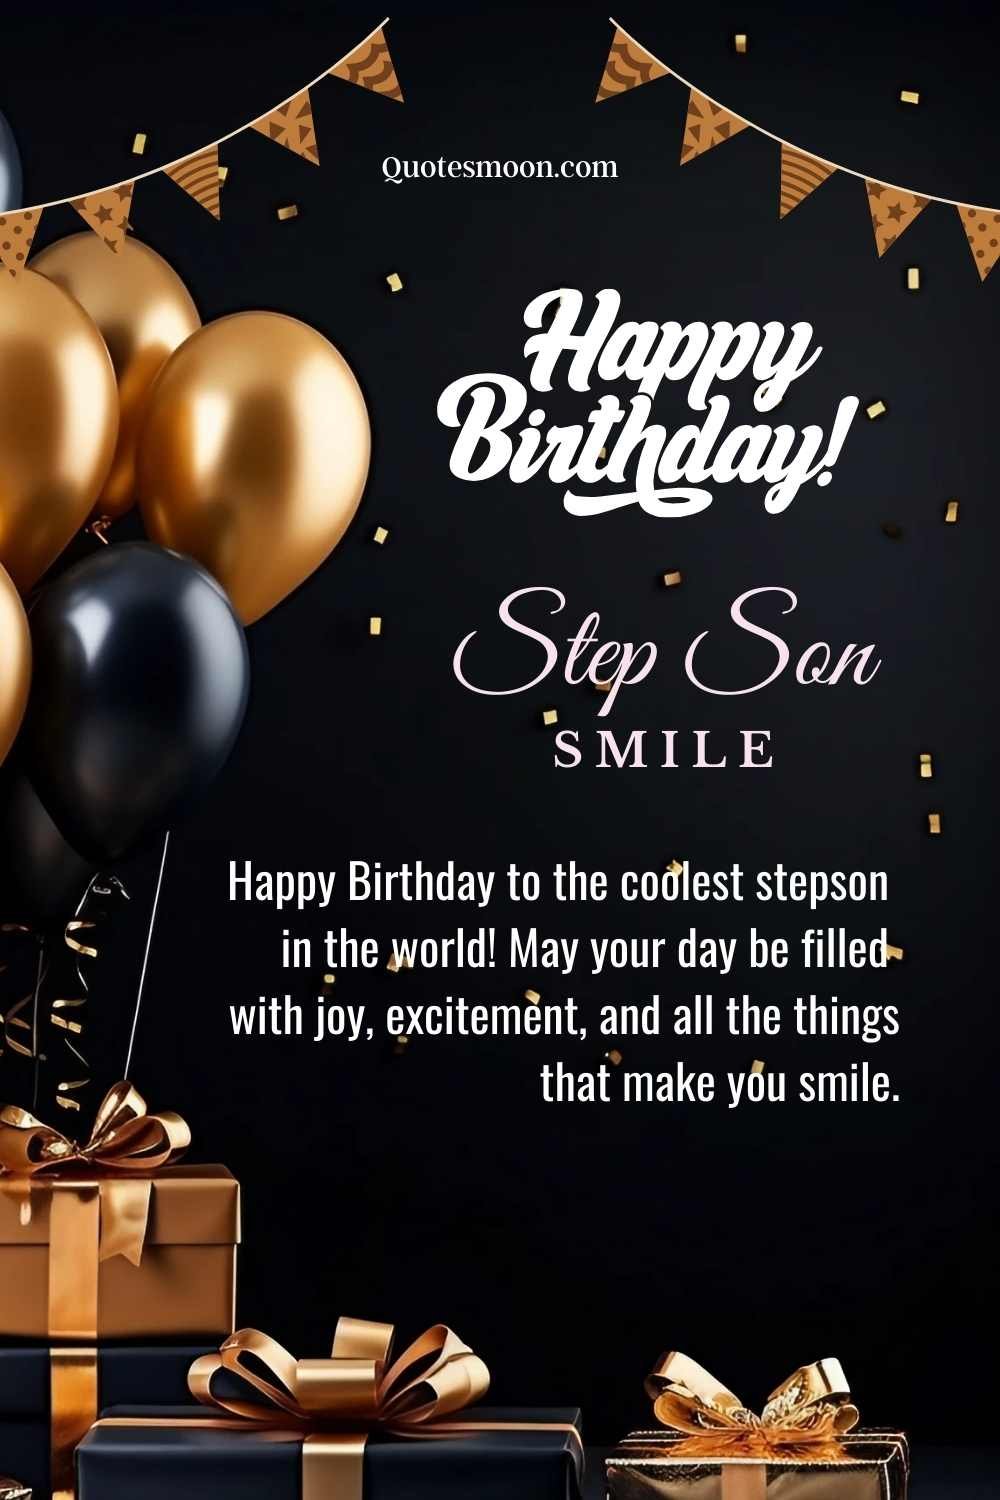 Letter to my step son on his birthday with images HD